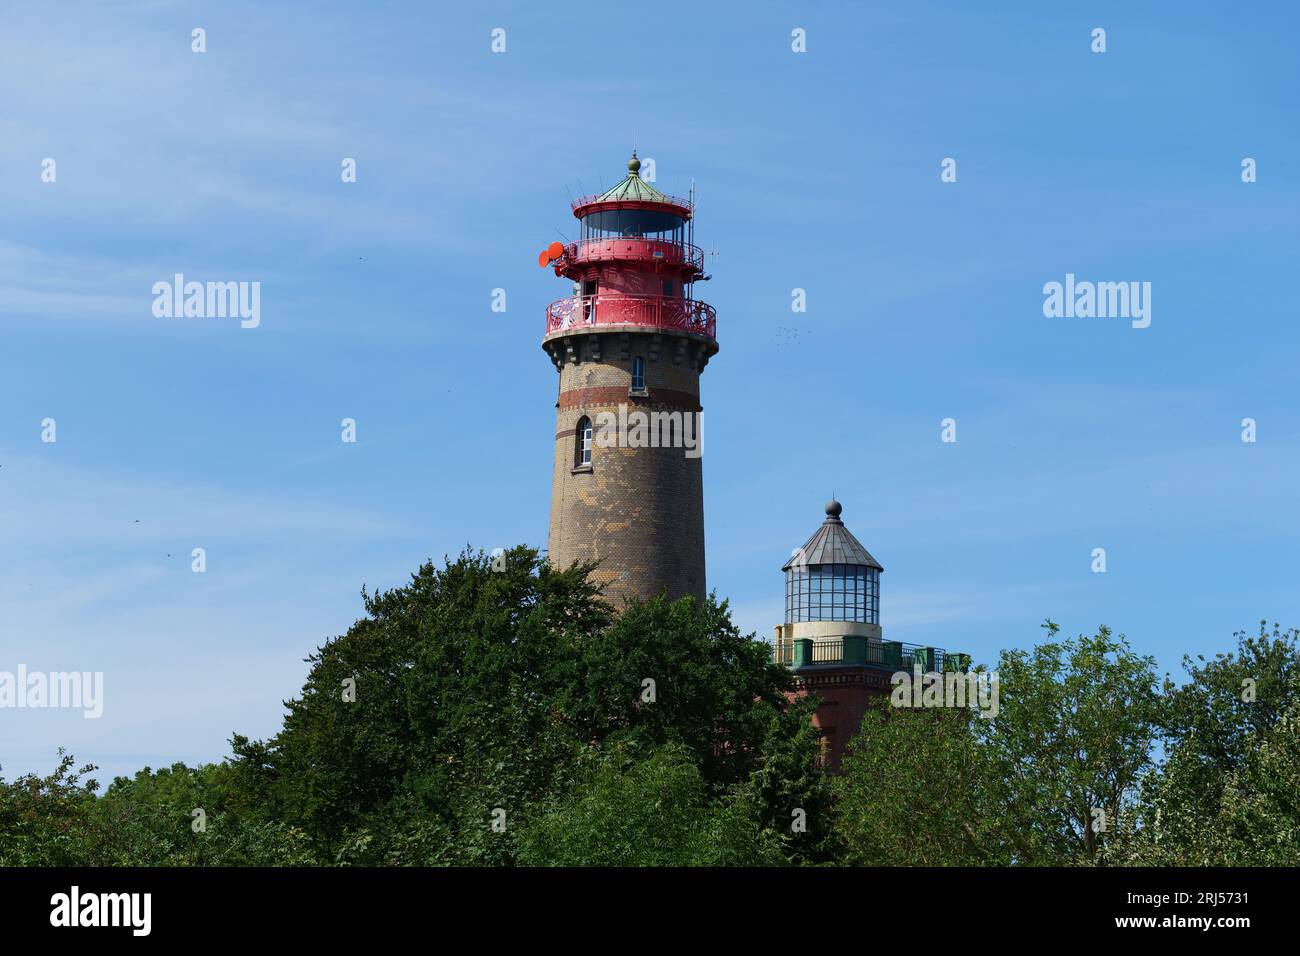 At Cape Arkona, there are two lighthouses, the Schinkel Tower and the Light Tower. Stock Photo